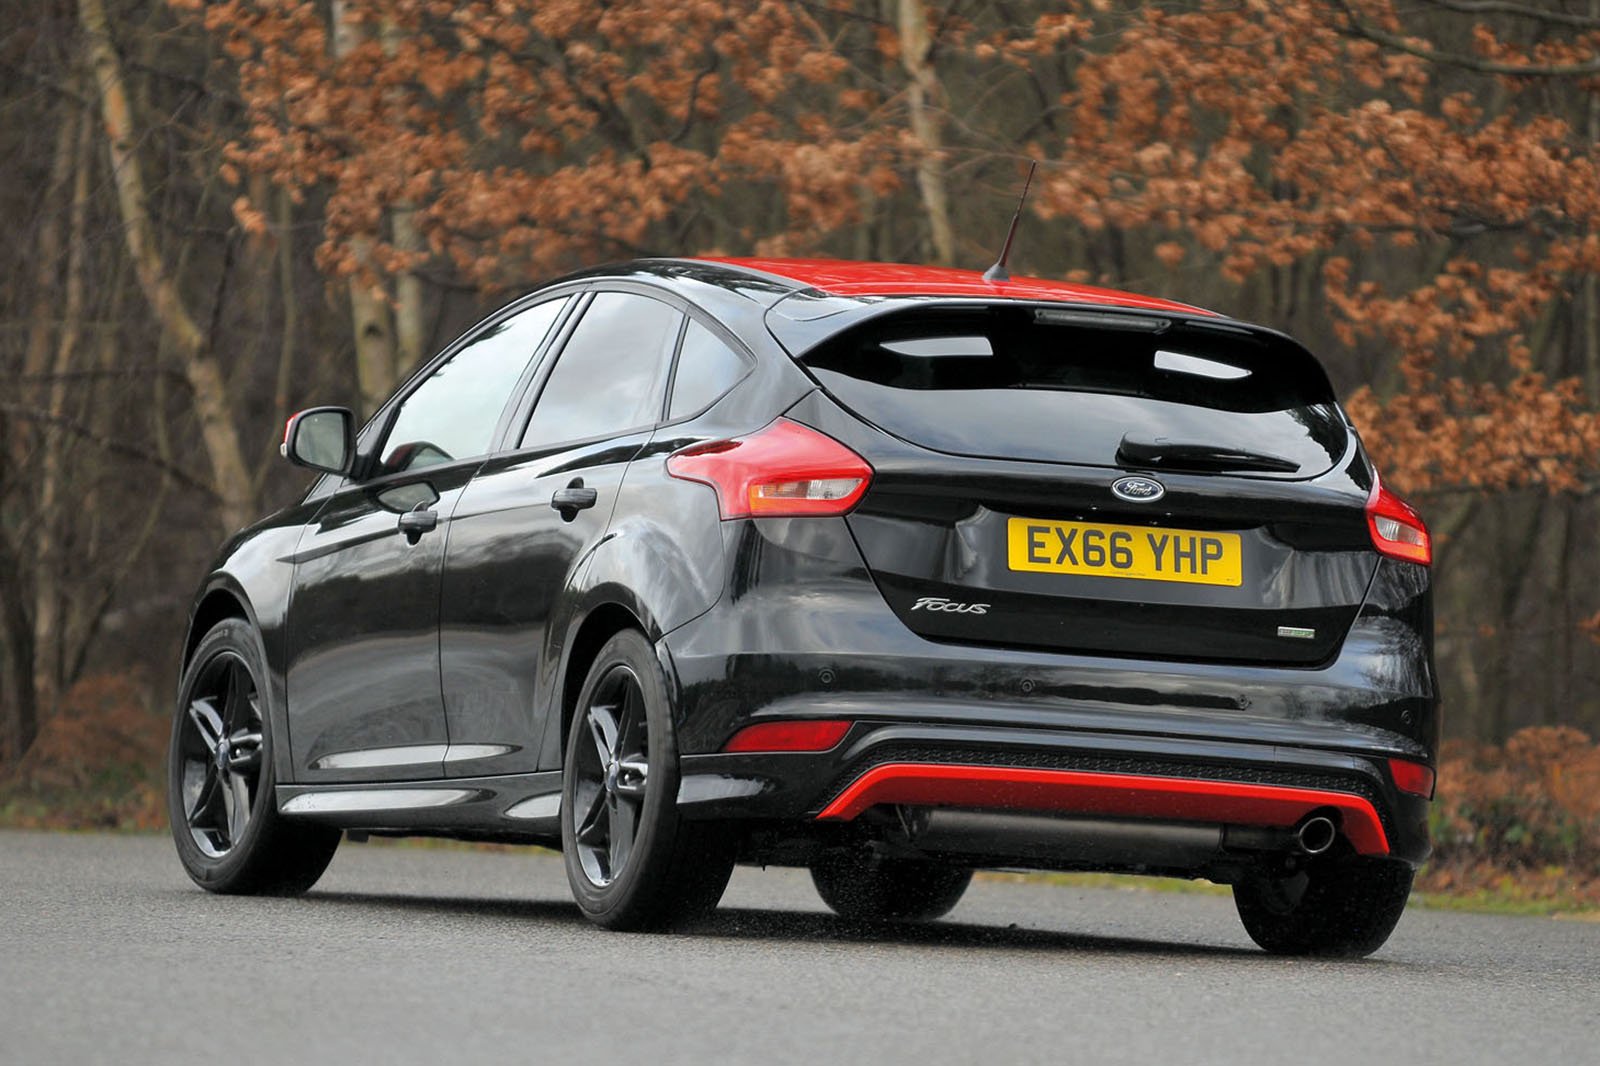 Ford Focus 2014-2018 design & styling | Autocar